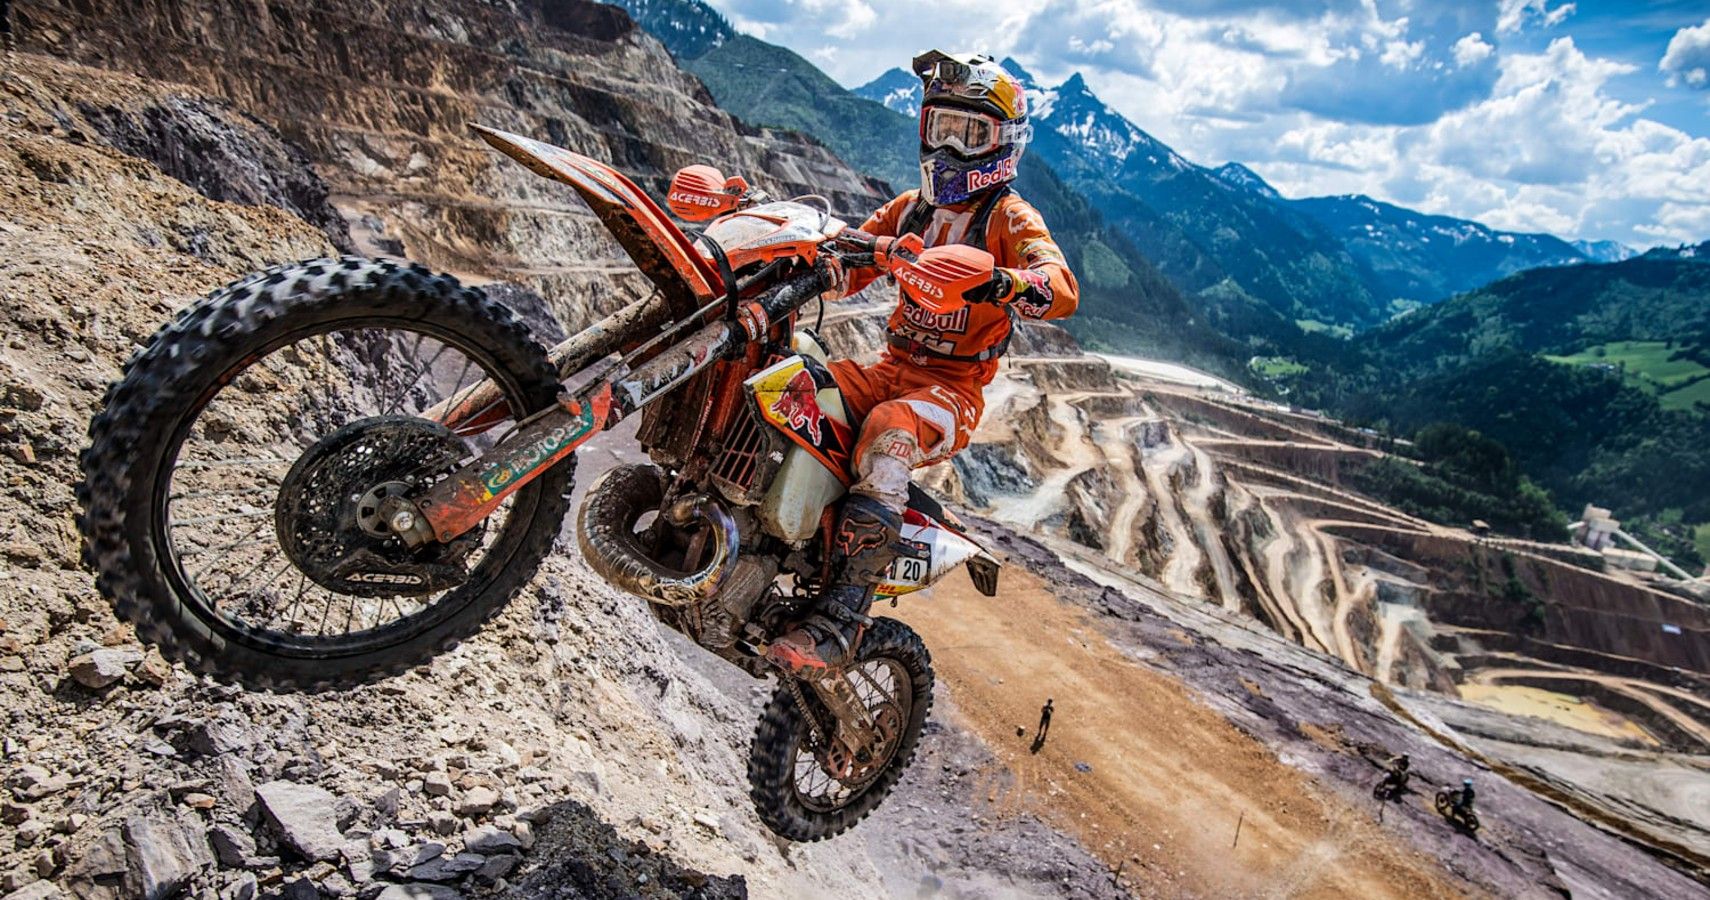 A racer during the Erzbergrodeo Red Bull Hare Scramble.